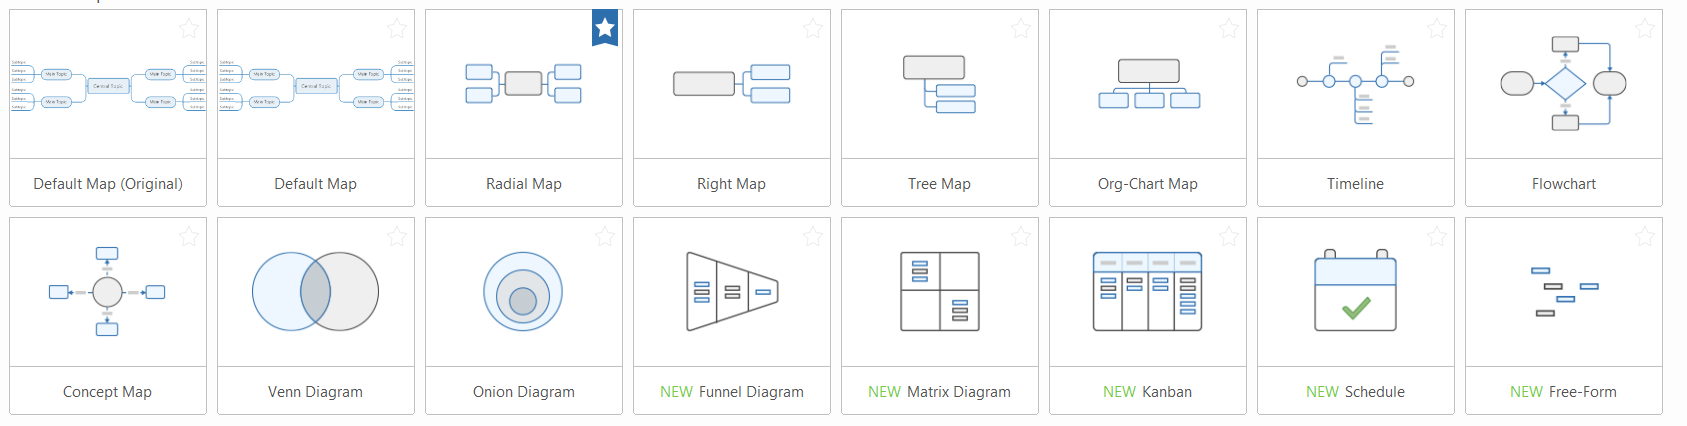 Map Template Examples | MindManager Blog